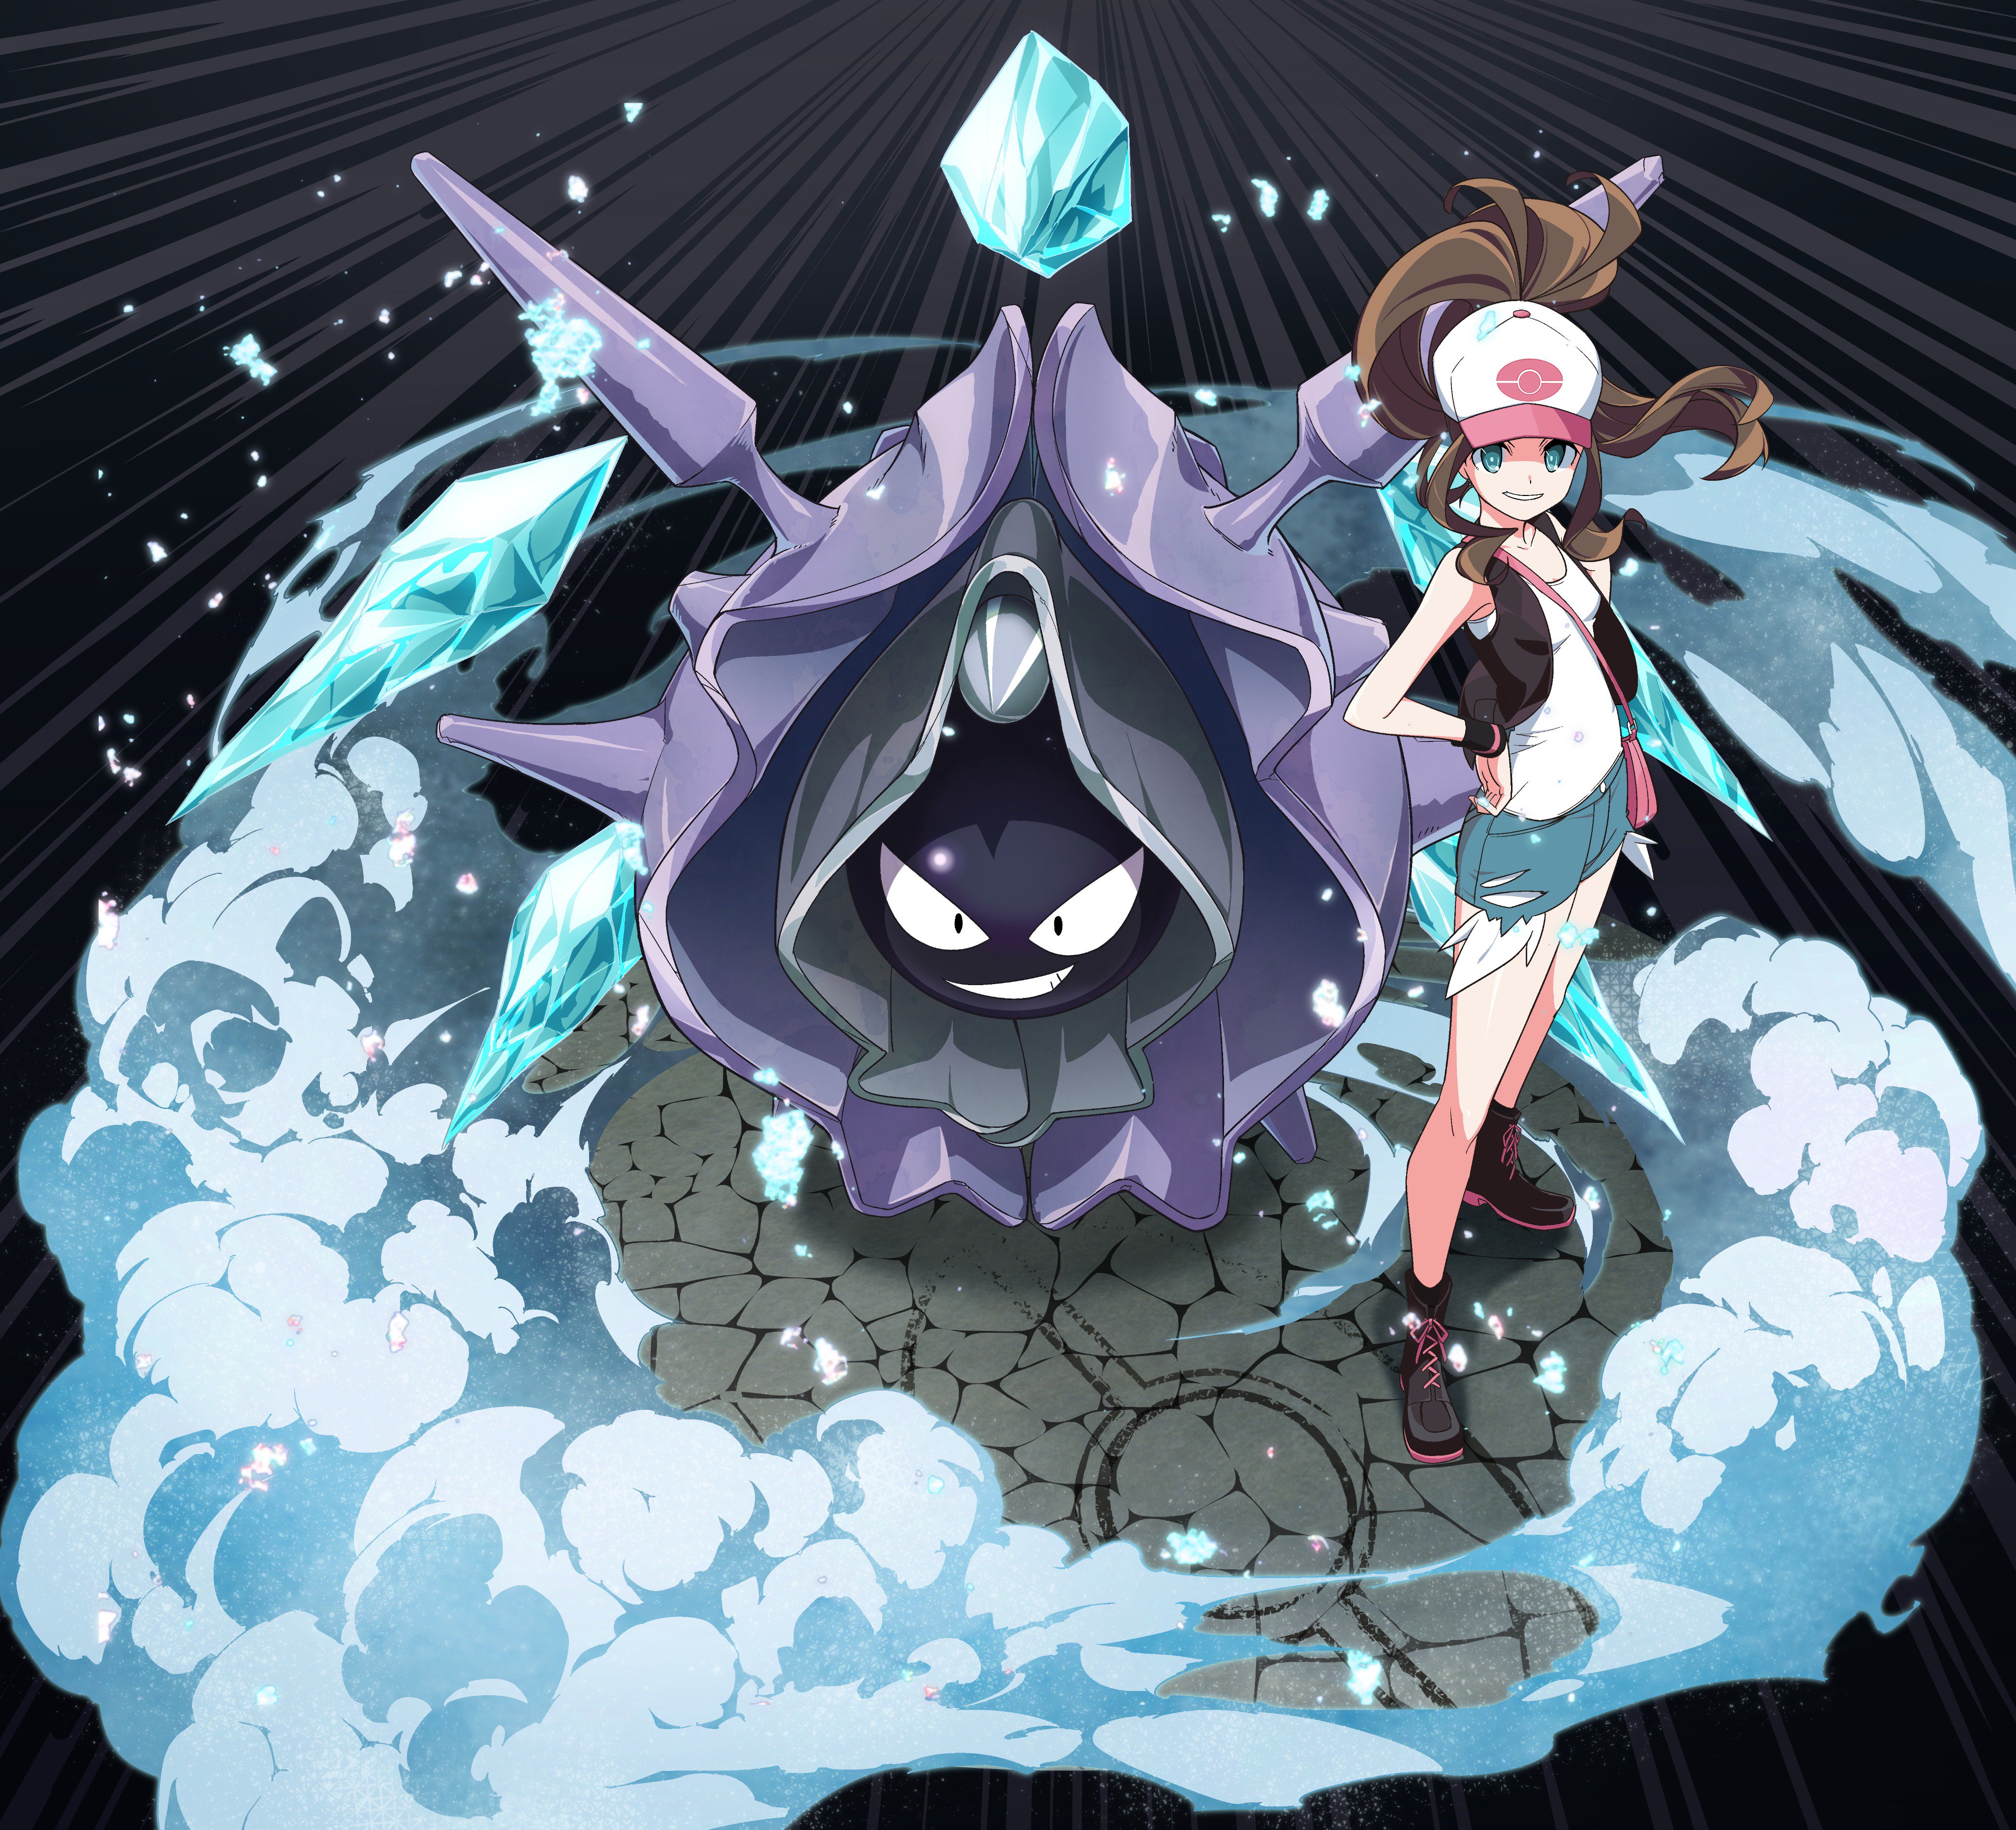 Cloyster Hd Wallpapers